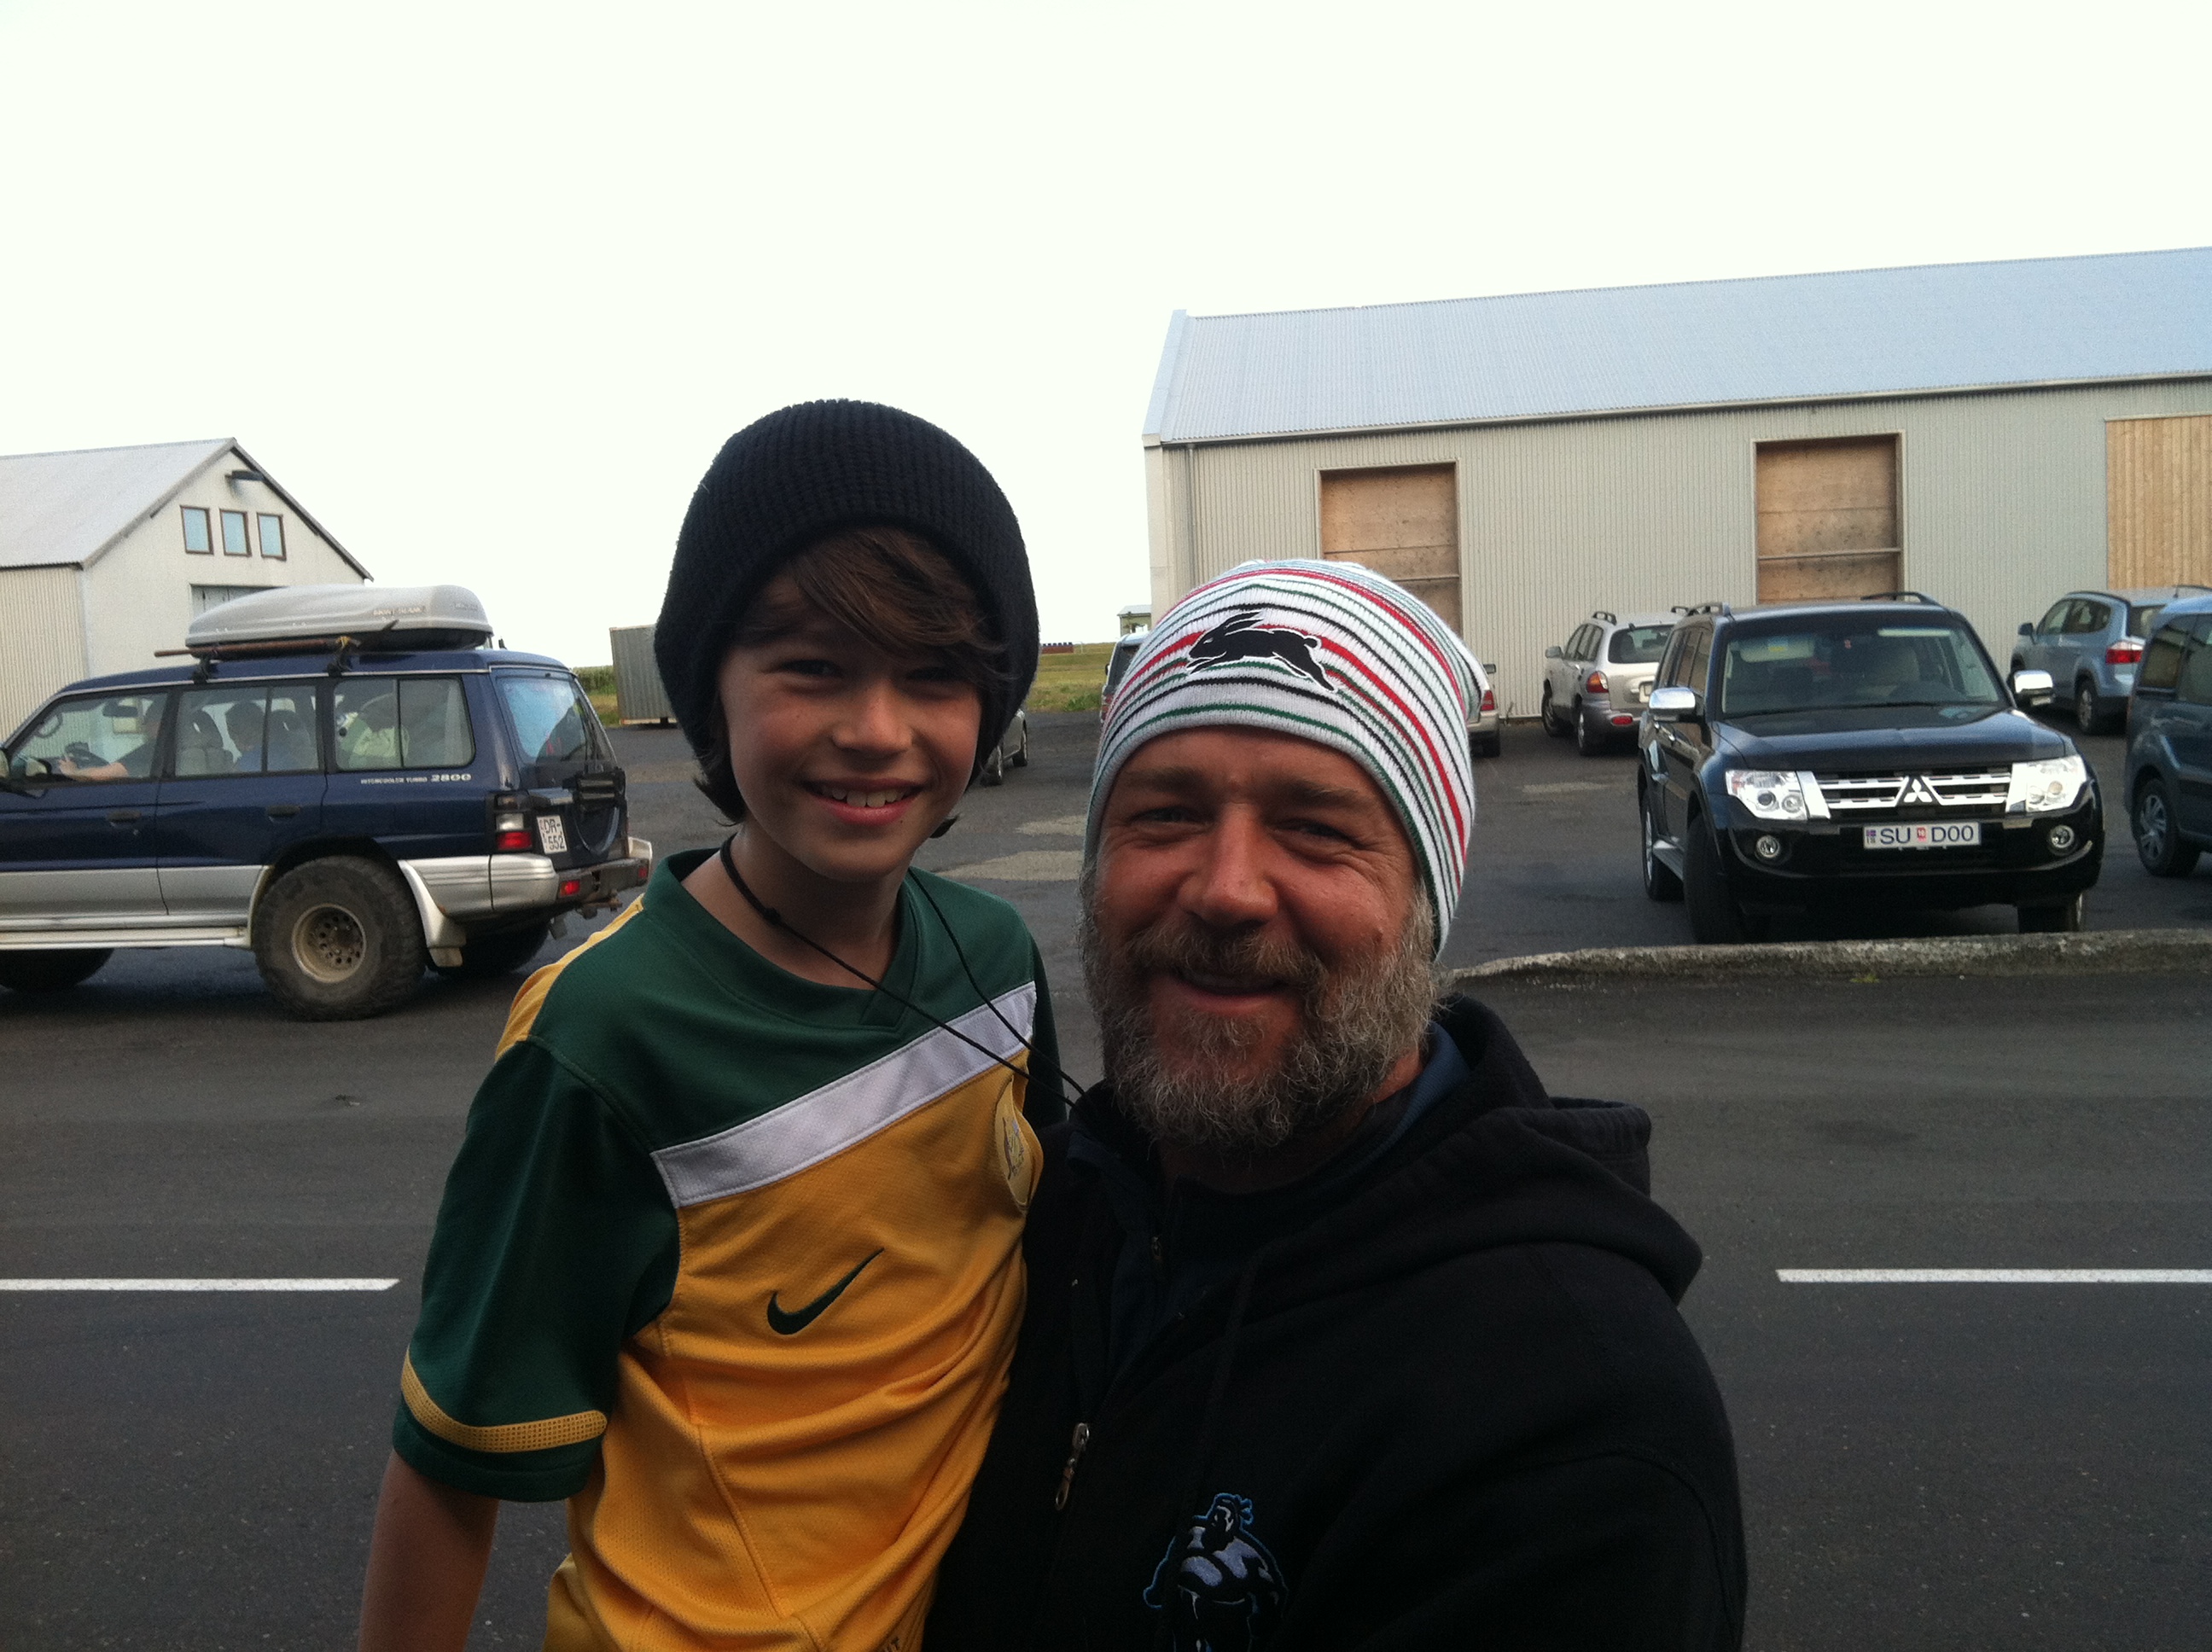 Me and Russell Crowe. He plays my dad in the movie Noah